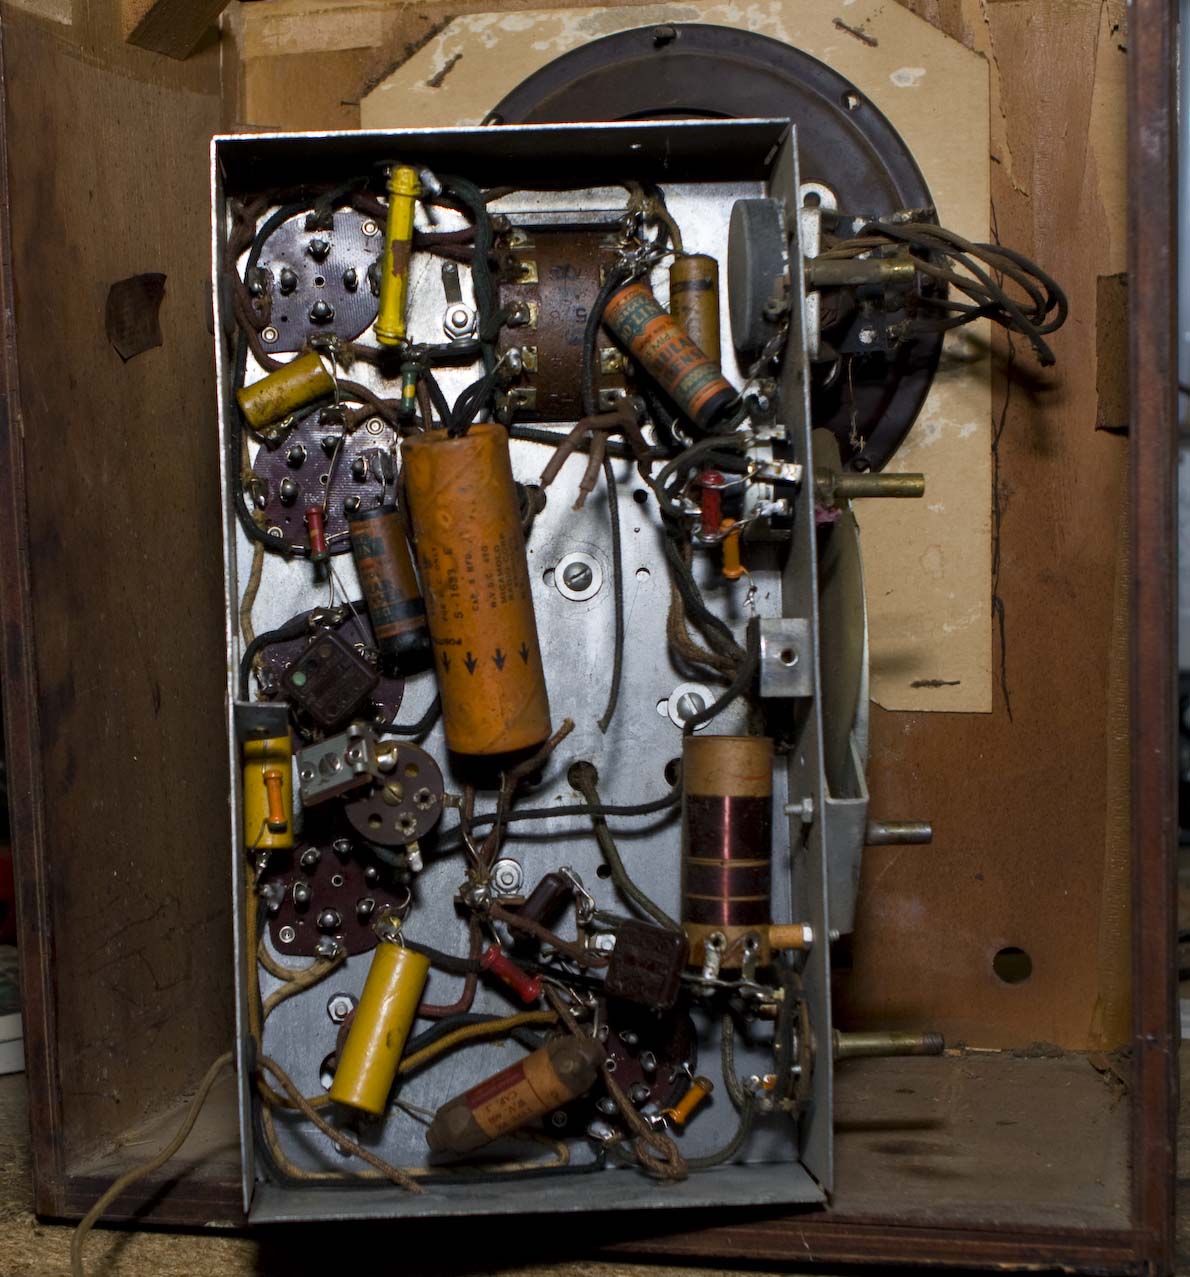 Aetna 502 tombstone radio (chassis below)